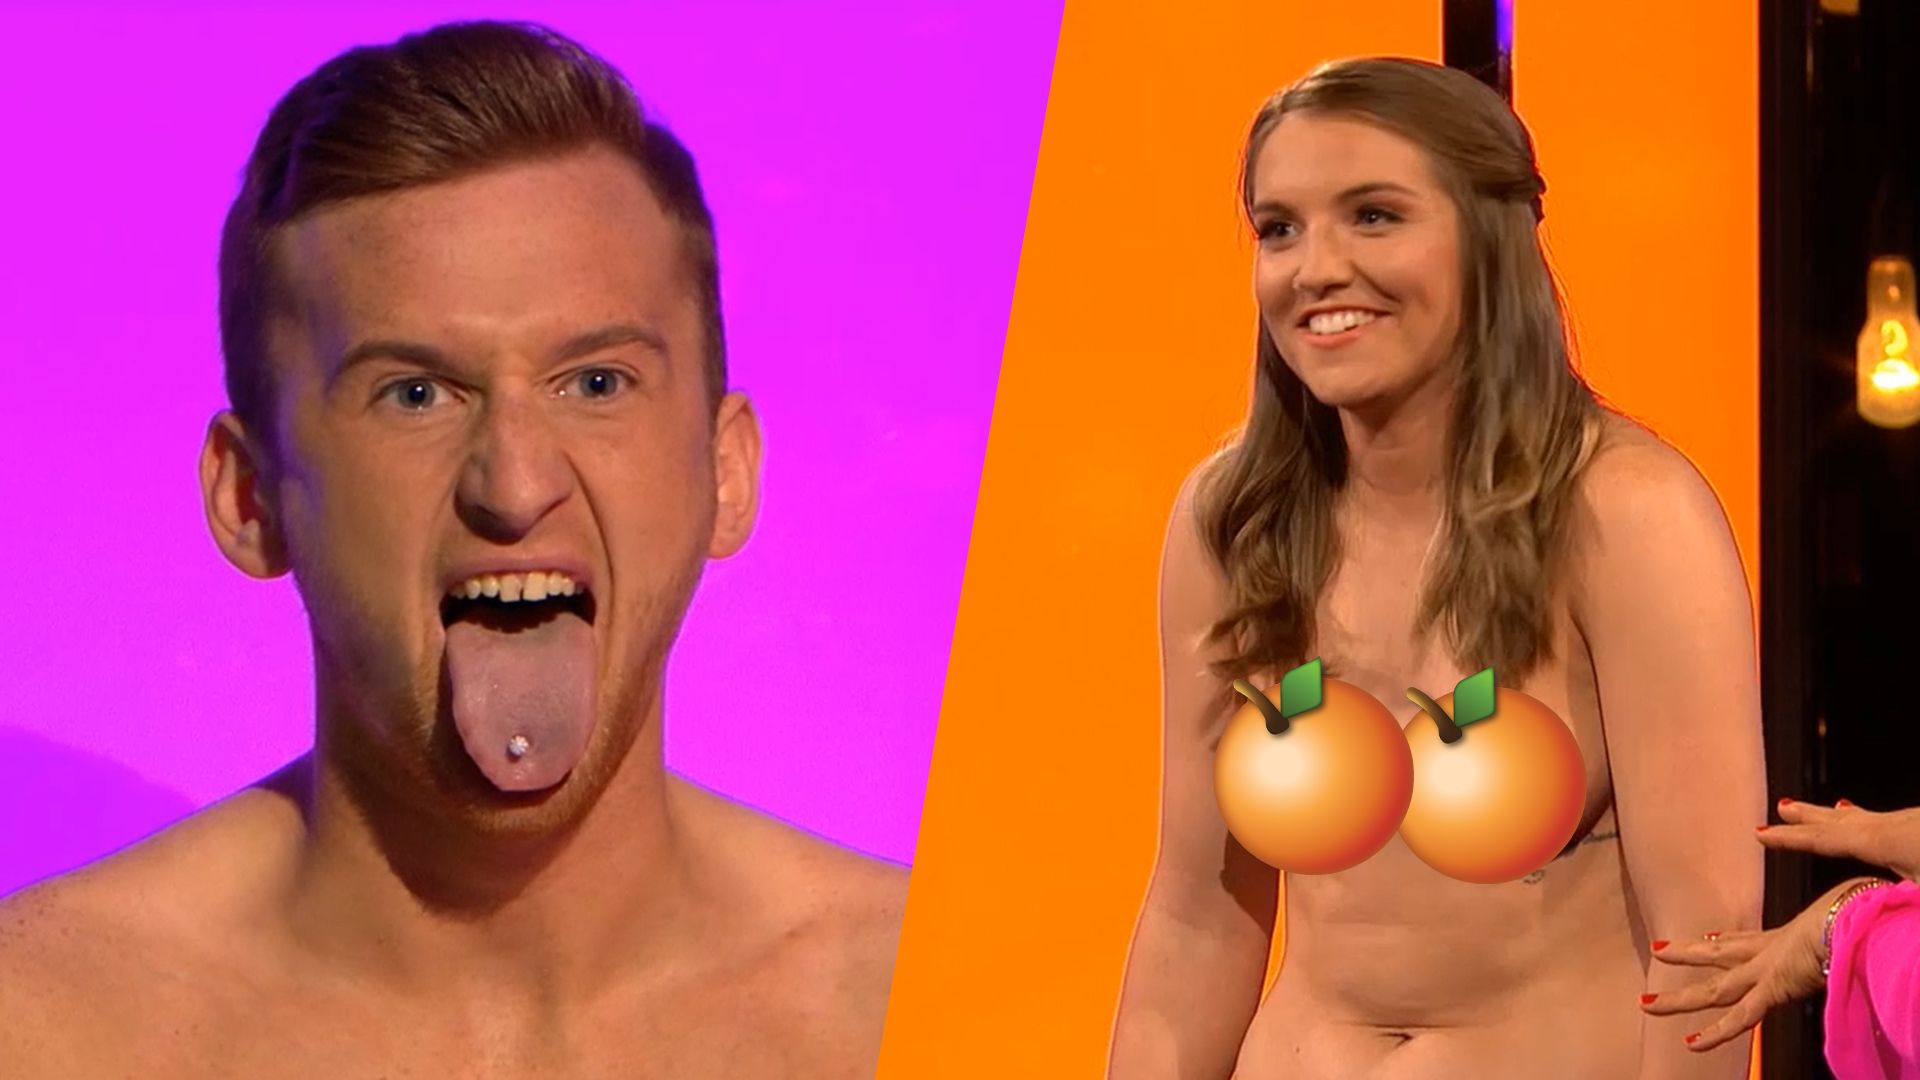 Naked Attraction Season 3 Ep 10 Rose and Clarissa, Watch 